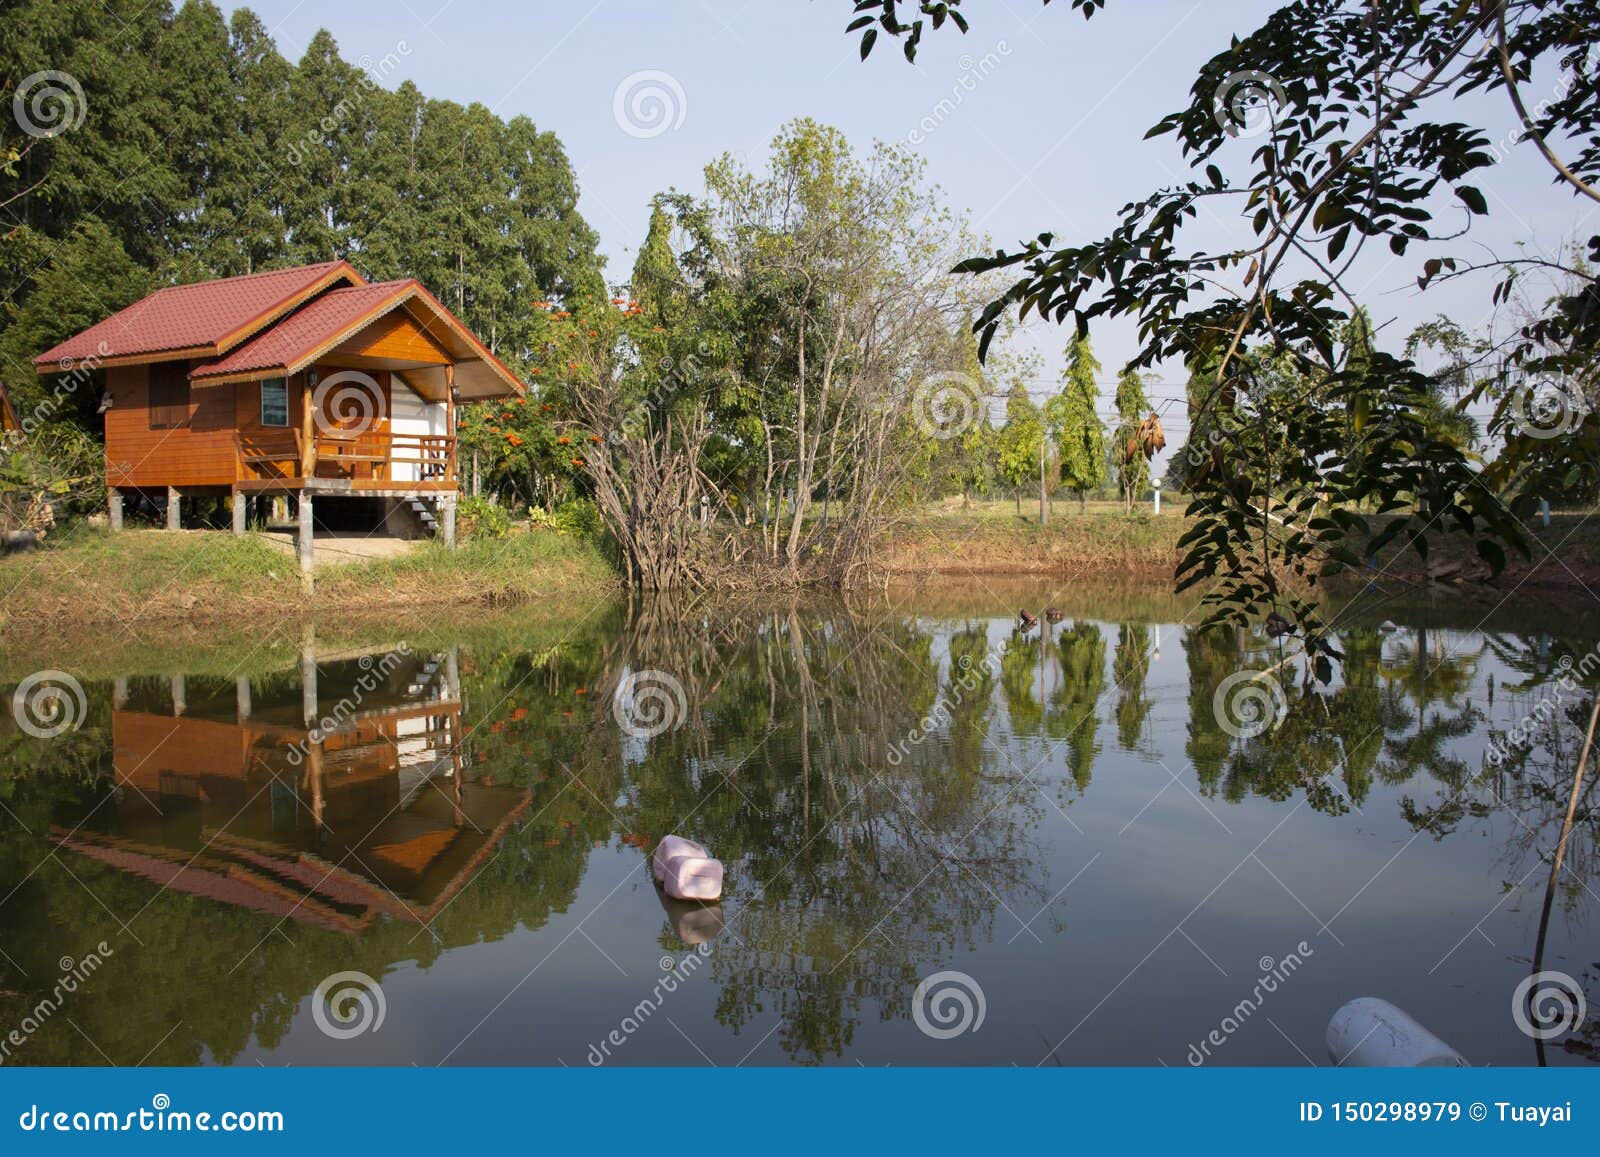 Wooden Hut In Garden Of Resort And Homestay For Thai People And